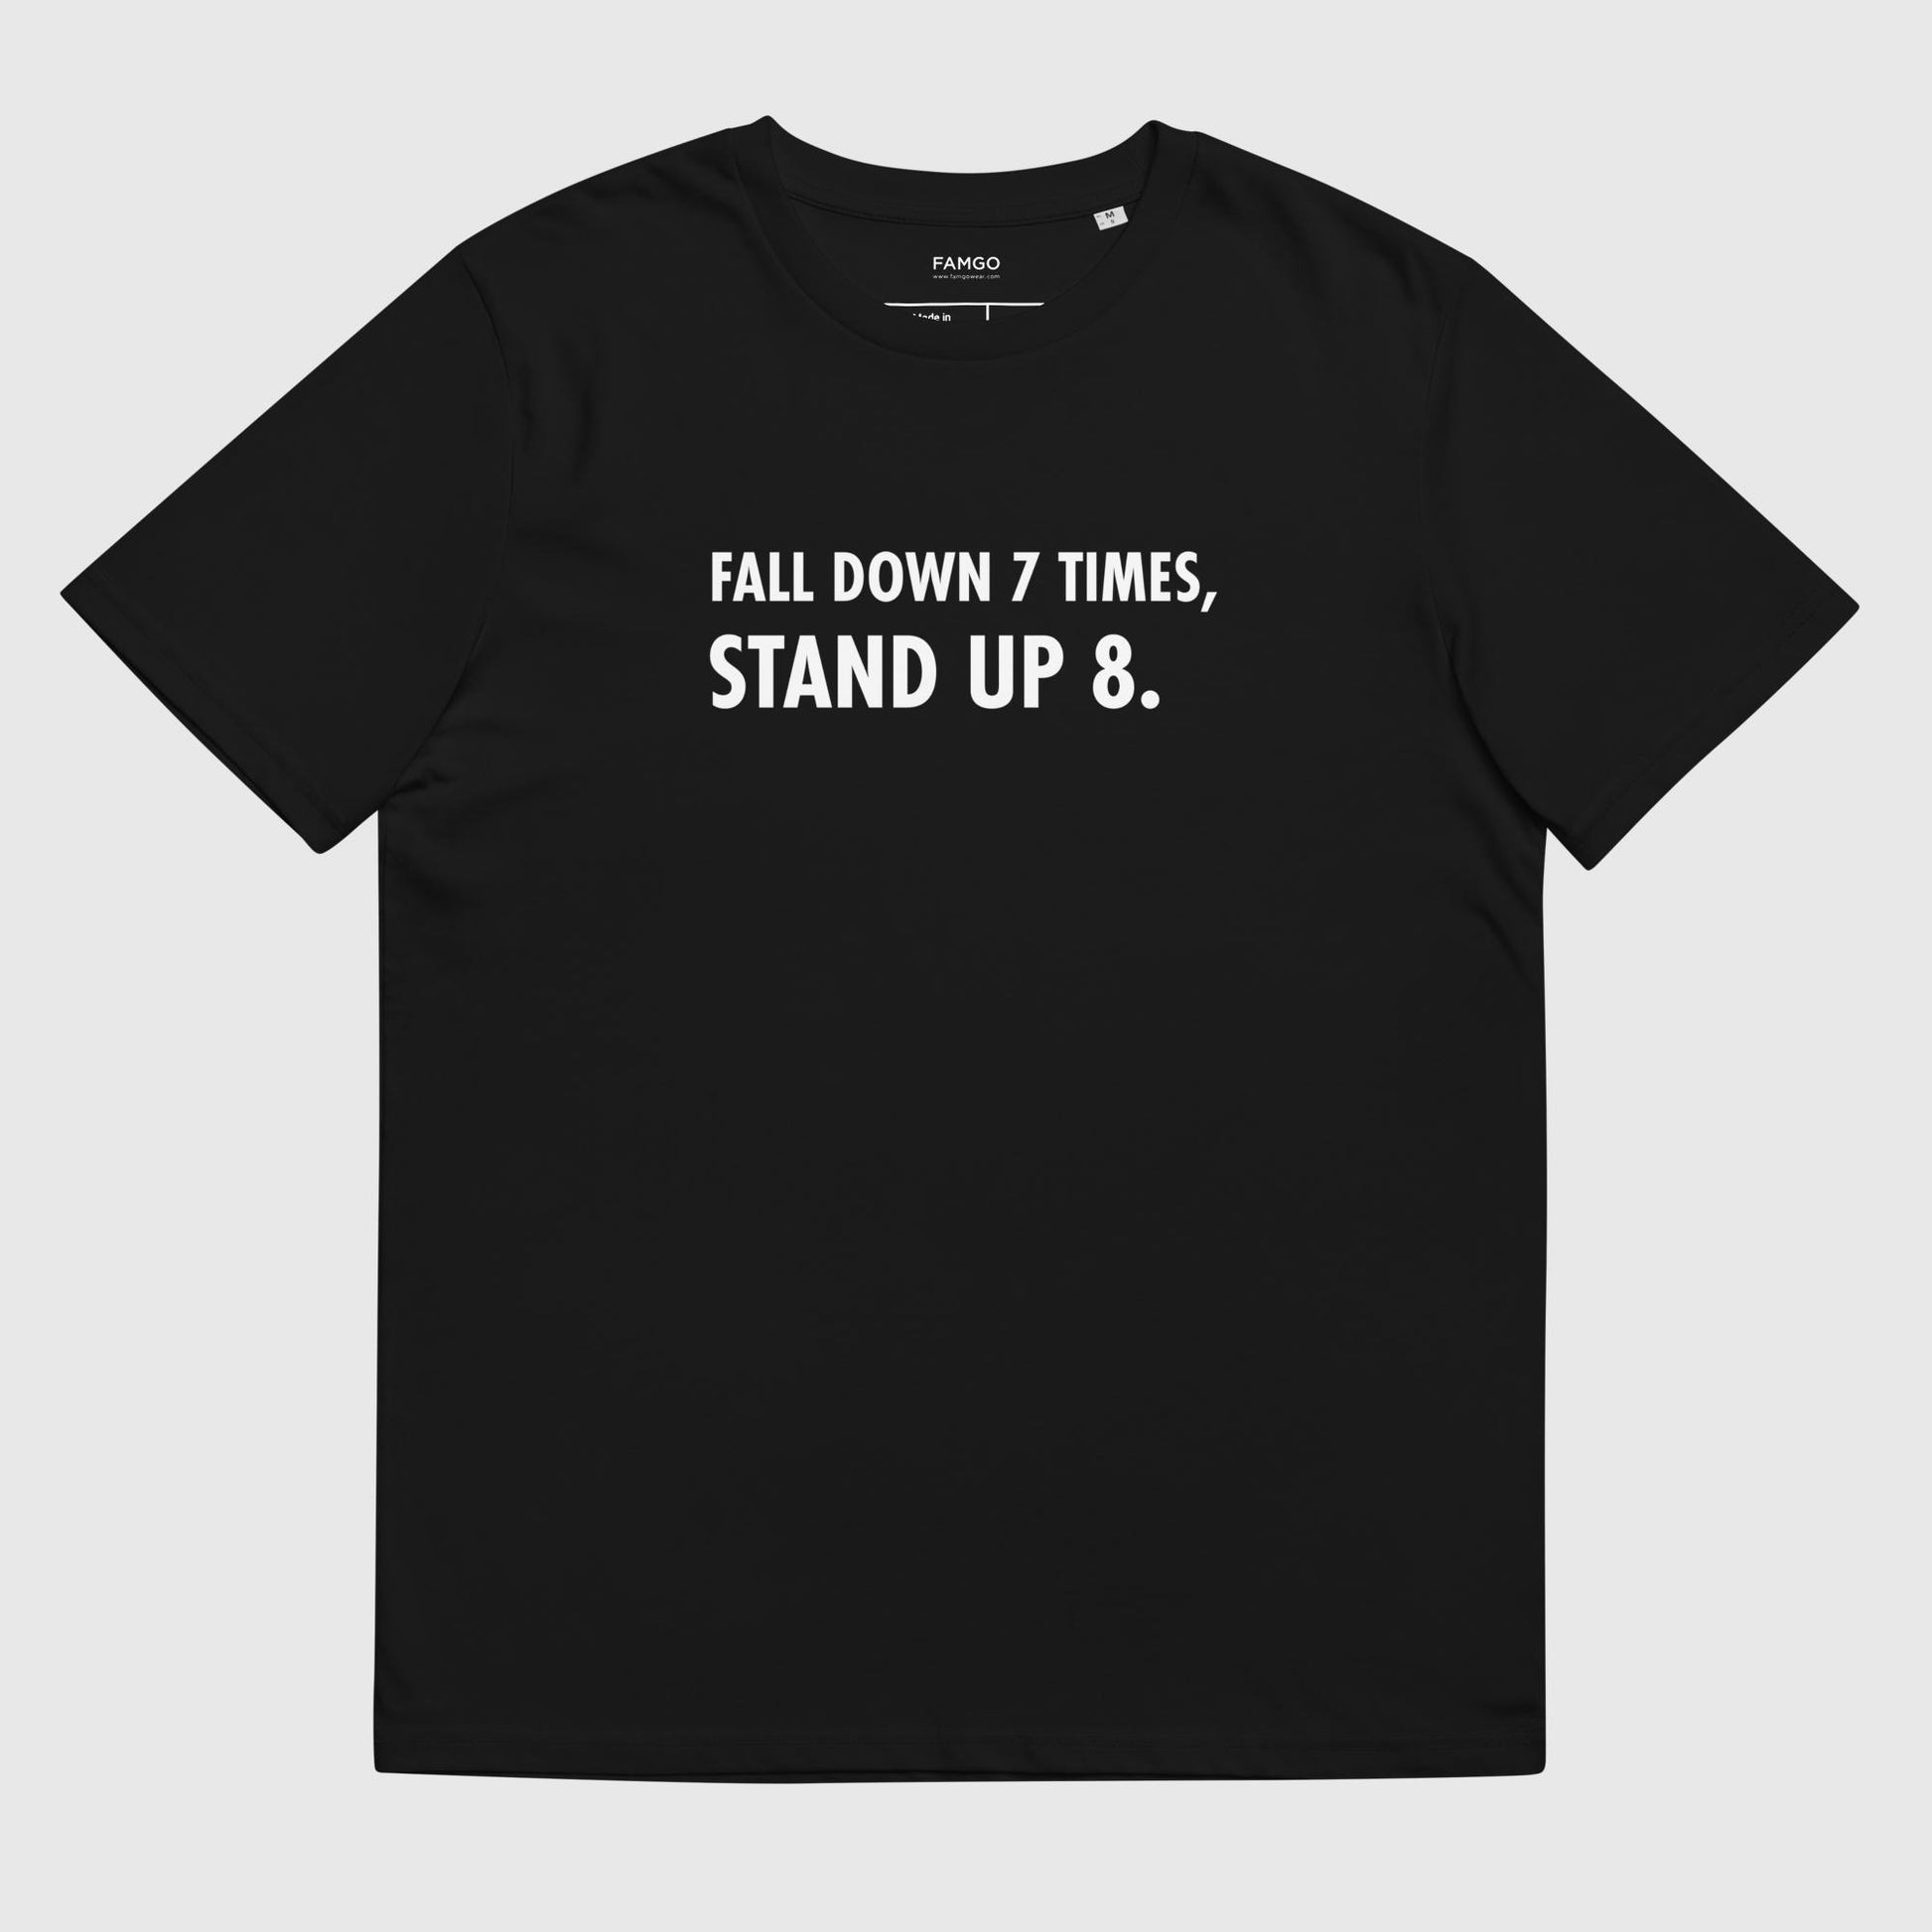 Men's black organic cotton t-shirt that features the Japanese proverb "Fall Down 7 Times, Stand Up 8."